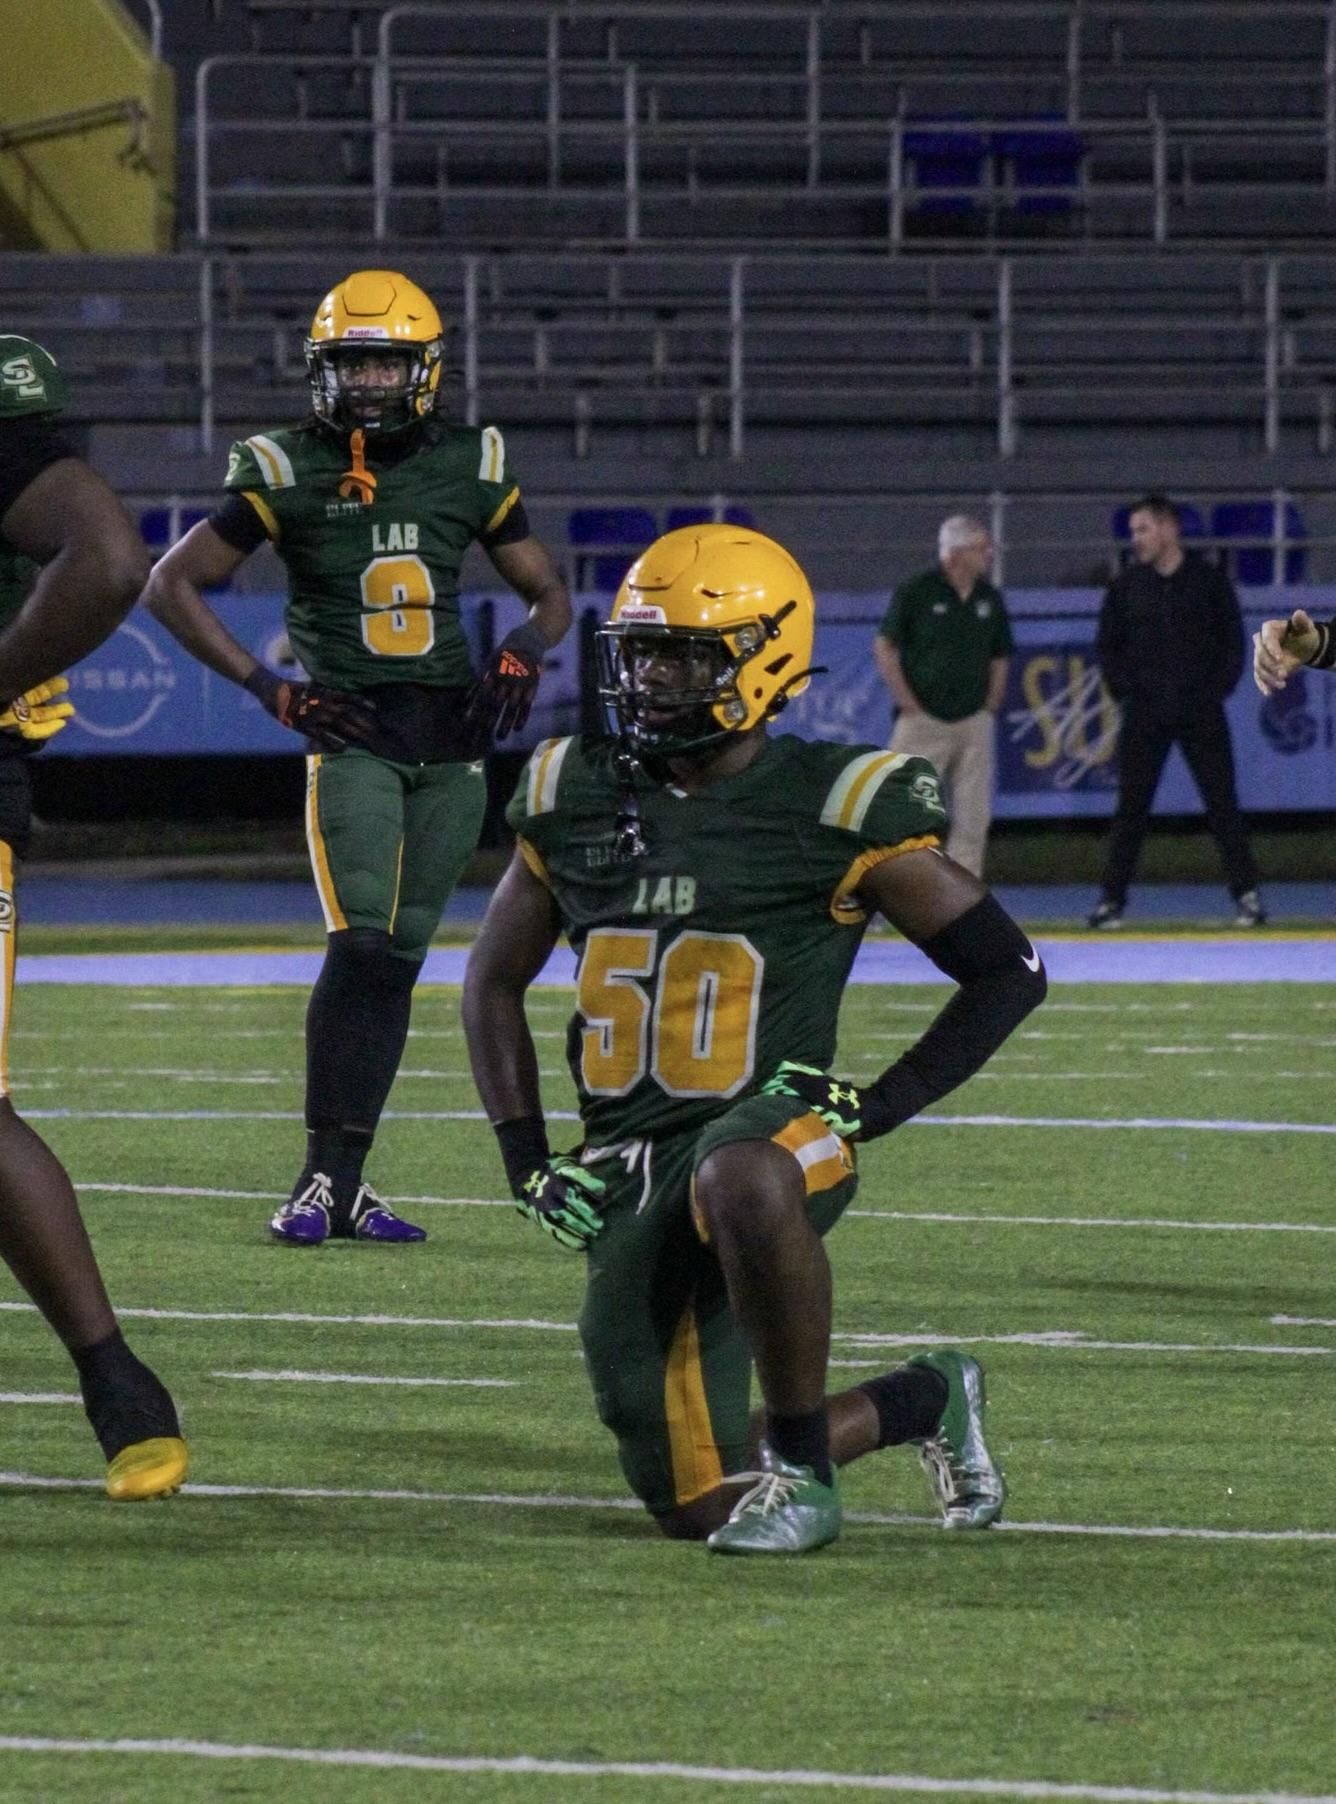 Gridiron Football Player of the Week (LHSAA Prep Classic Edition): 2024 DE/LB Evan Mickles, Southern Lab